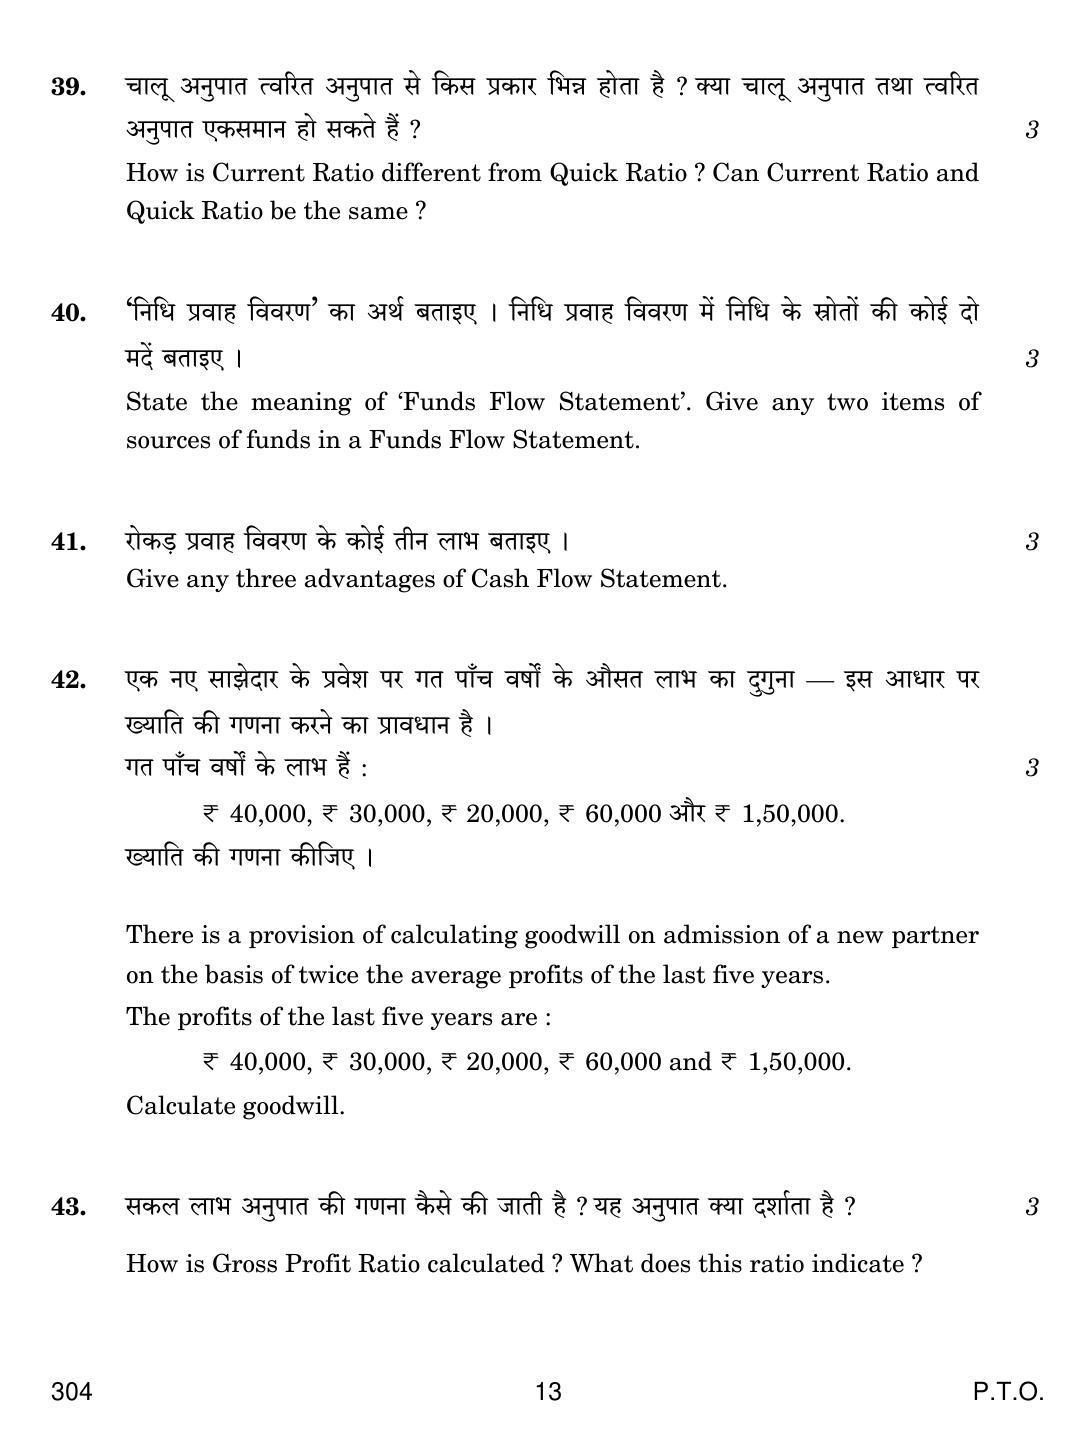 CBSE Class 12 304 FINANCIAL ACCOUNTING 2018 Question Paper - Page 13